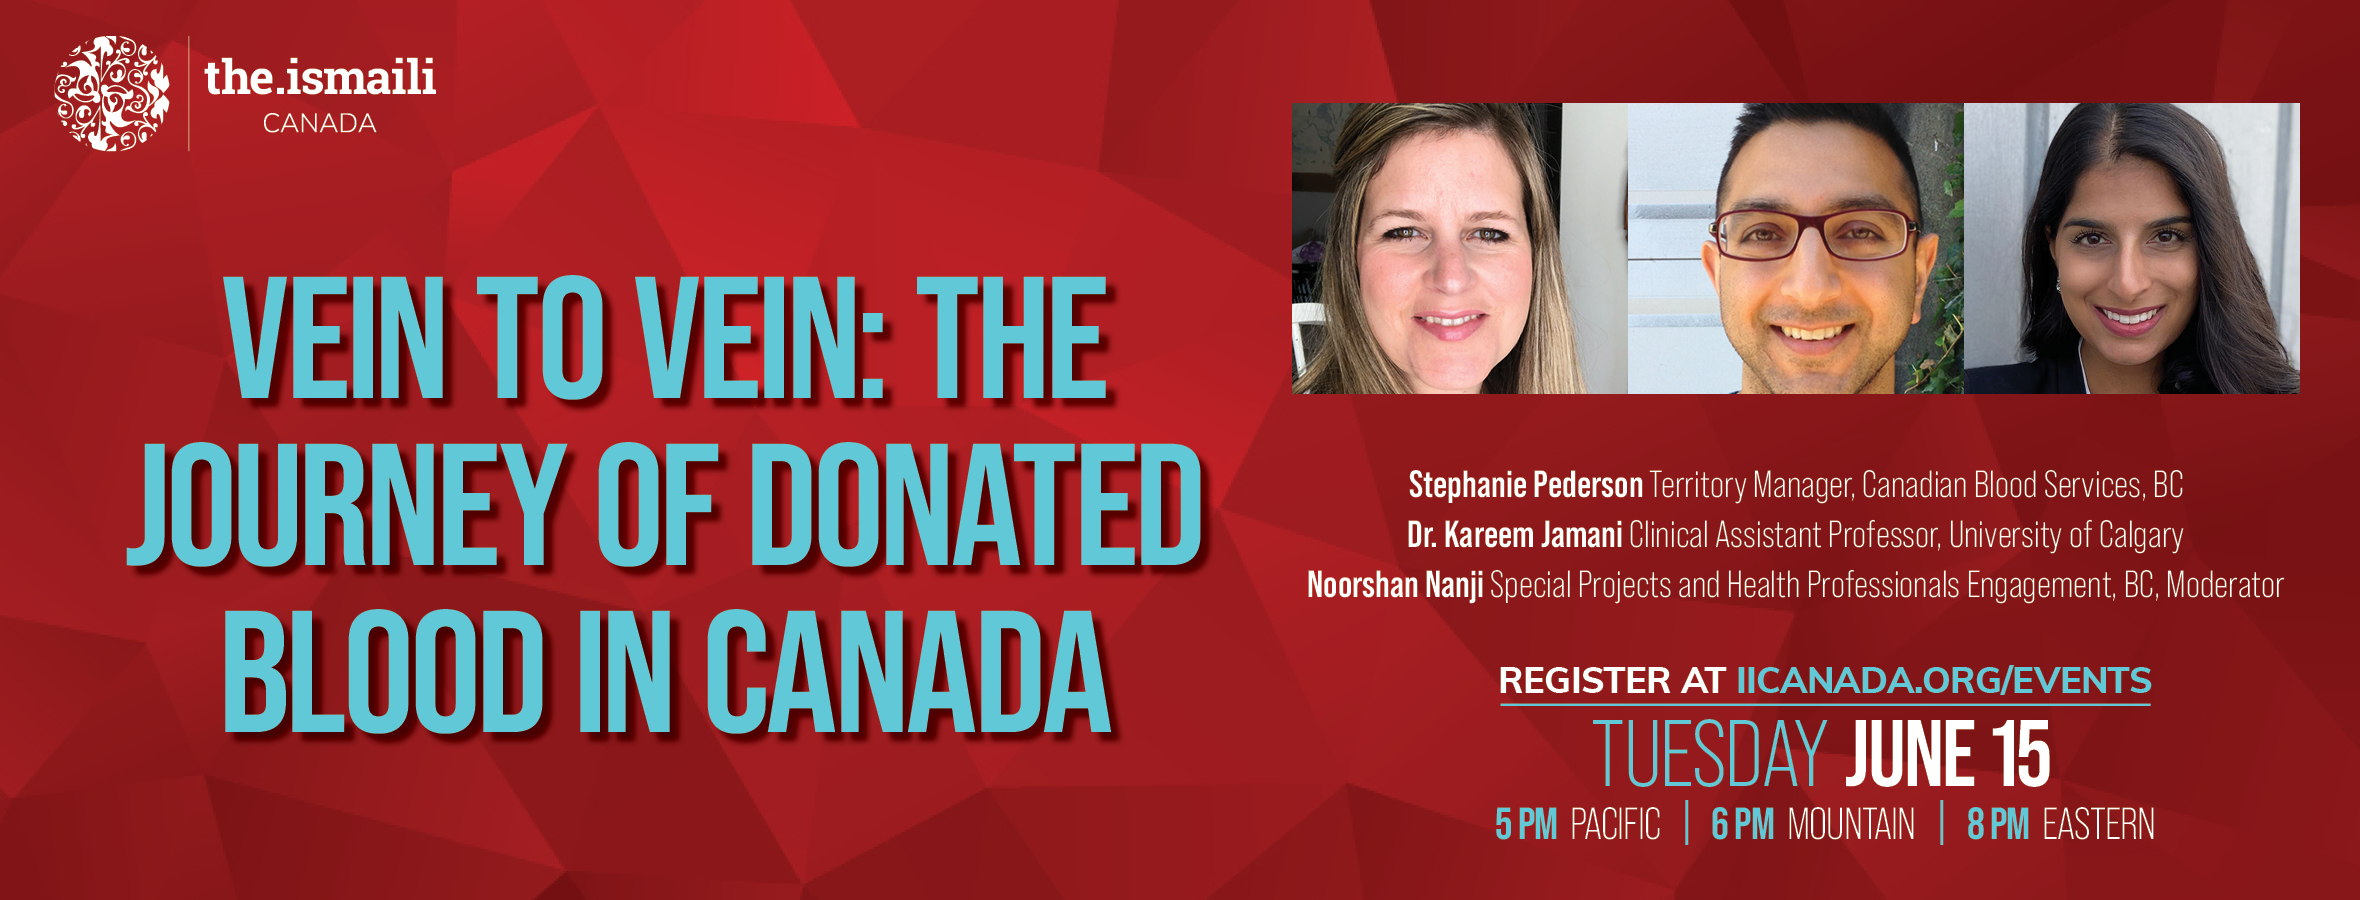 Vein to Vein: The Journey of Donated Blood in Canada